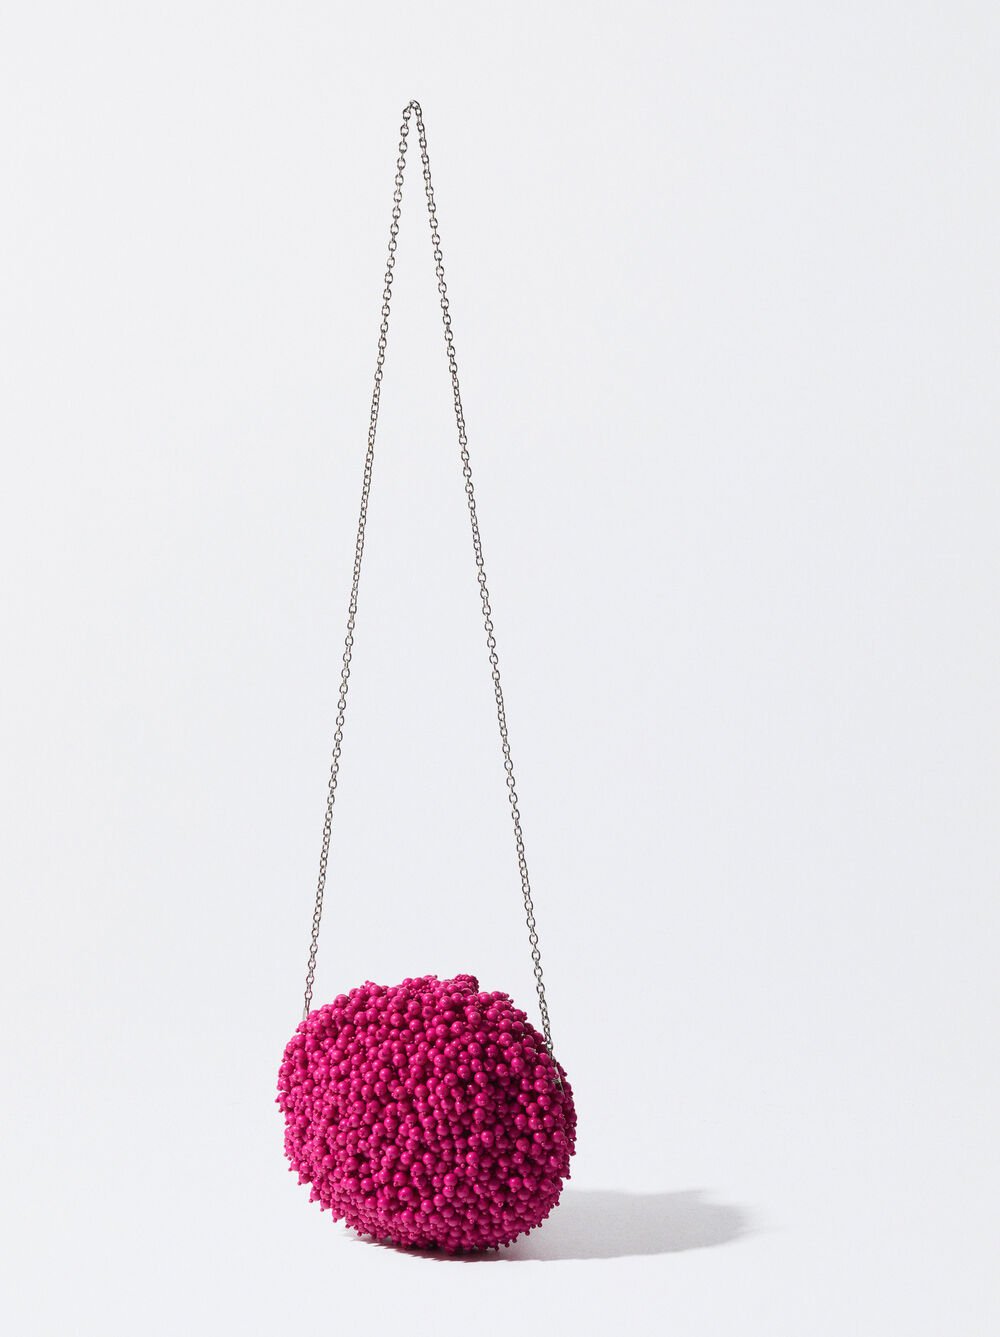 Party Handbag With Beads